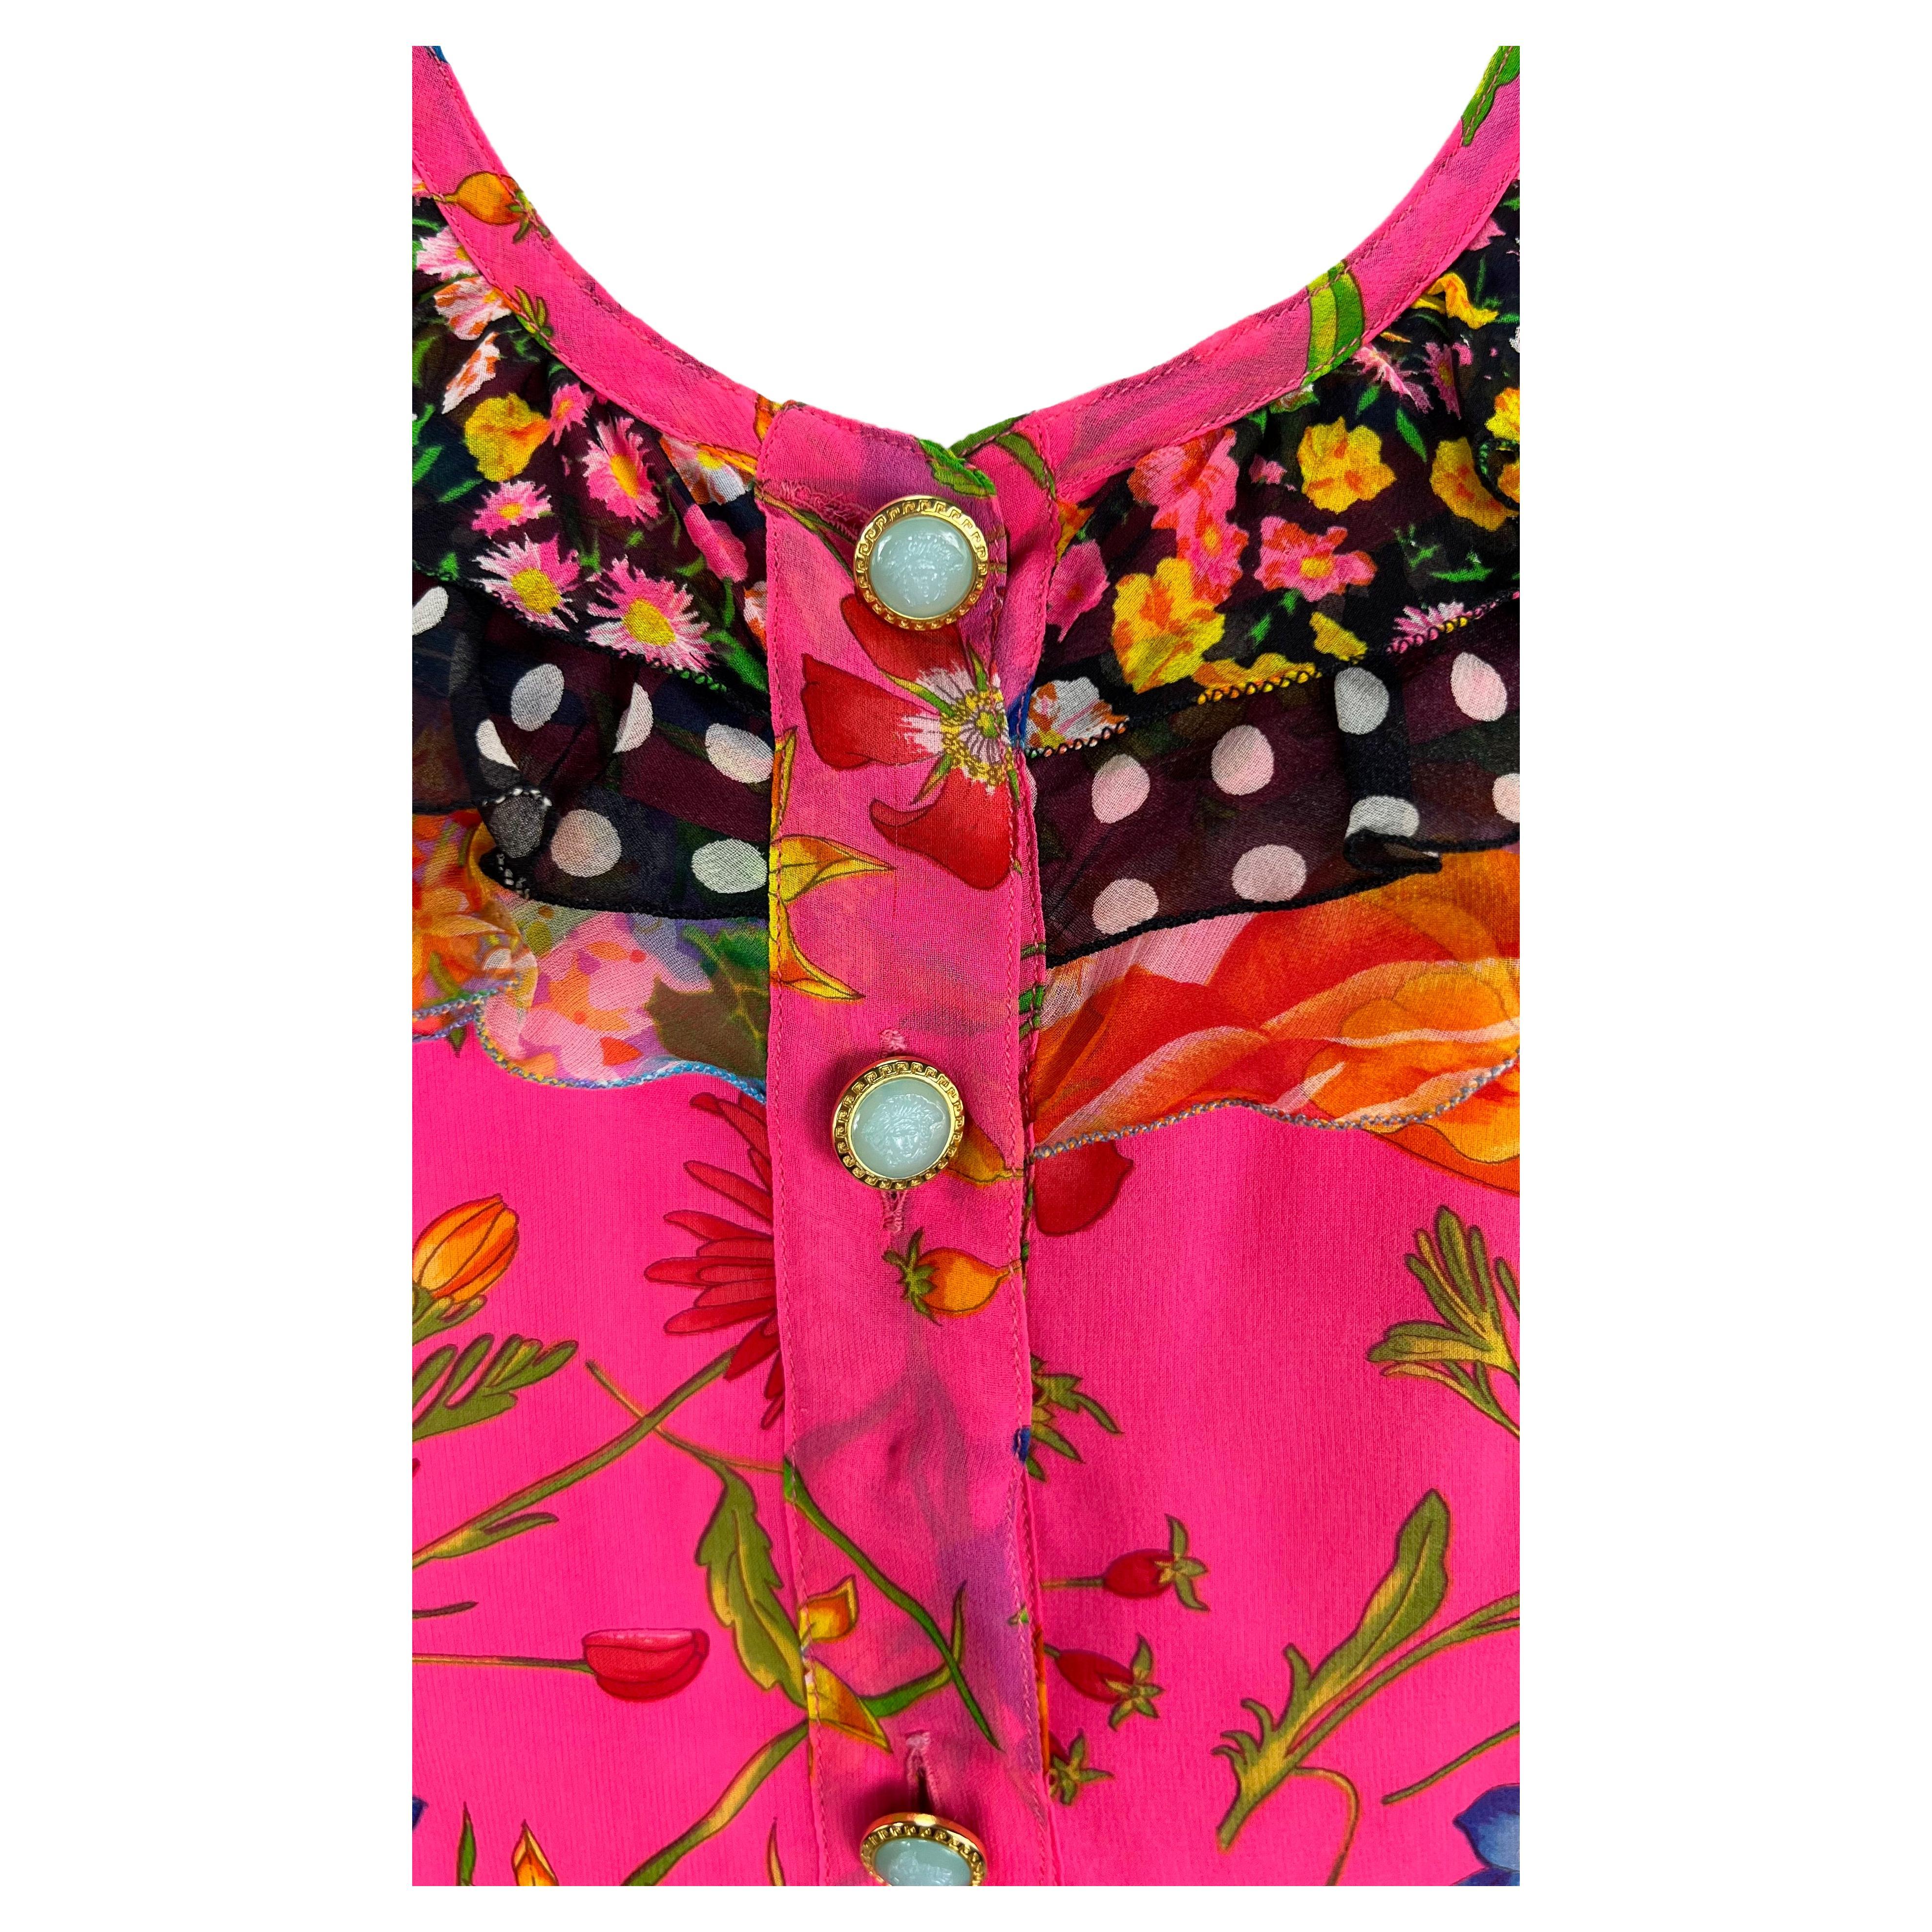 Women's S/S 1993 Gianni Versace Runway Pink Floral Ruffle Medusa Sleeveless Top For Sale